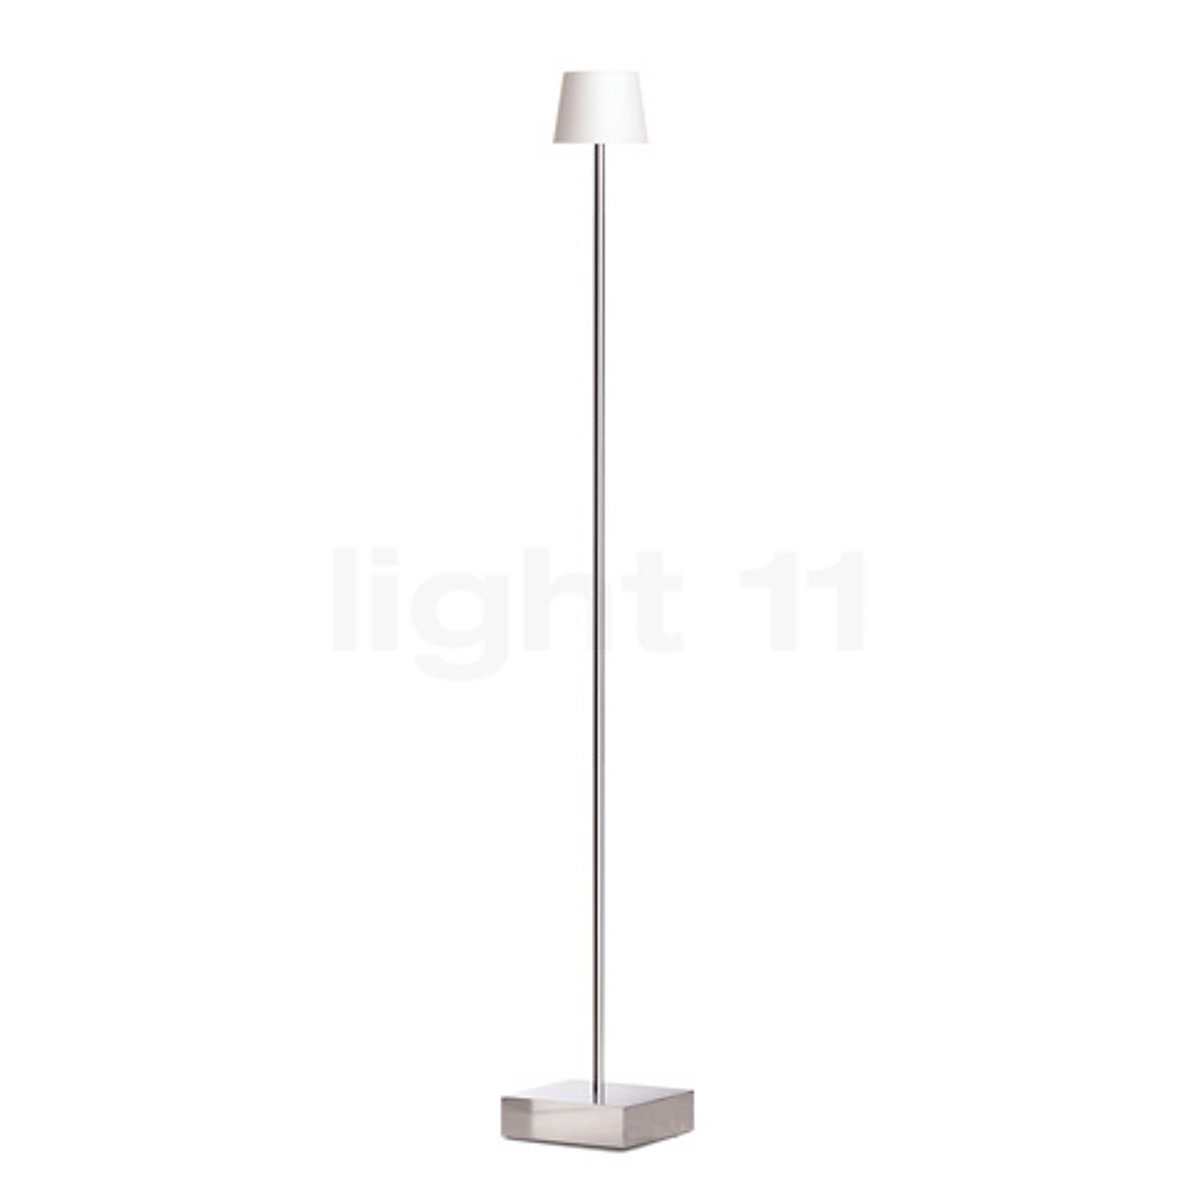 Buy Anta Cut Floor Lamp With Cord Dimmer At Light11 Eu